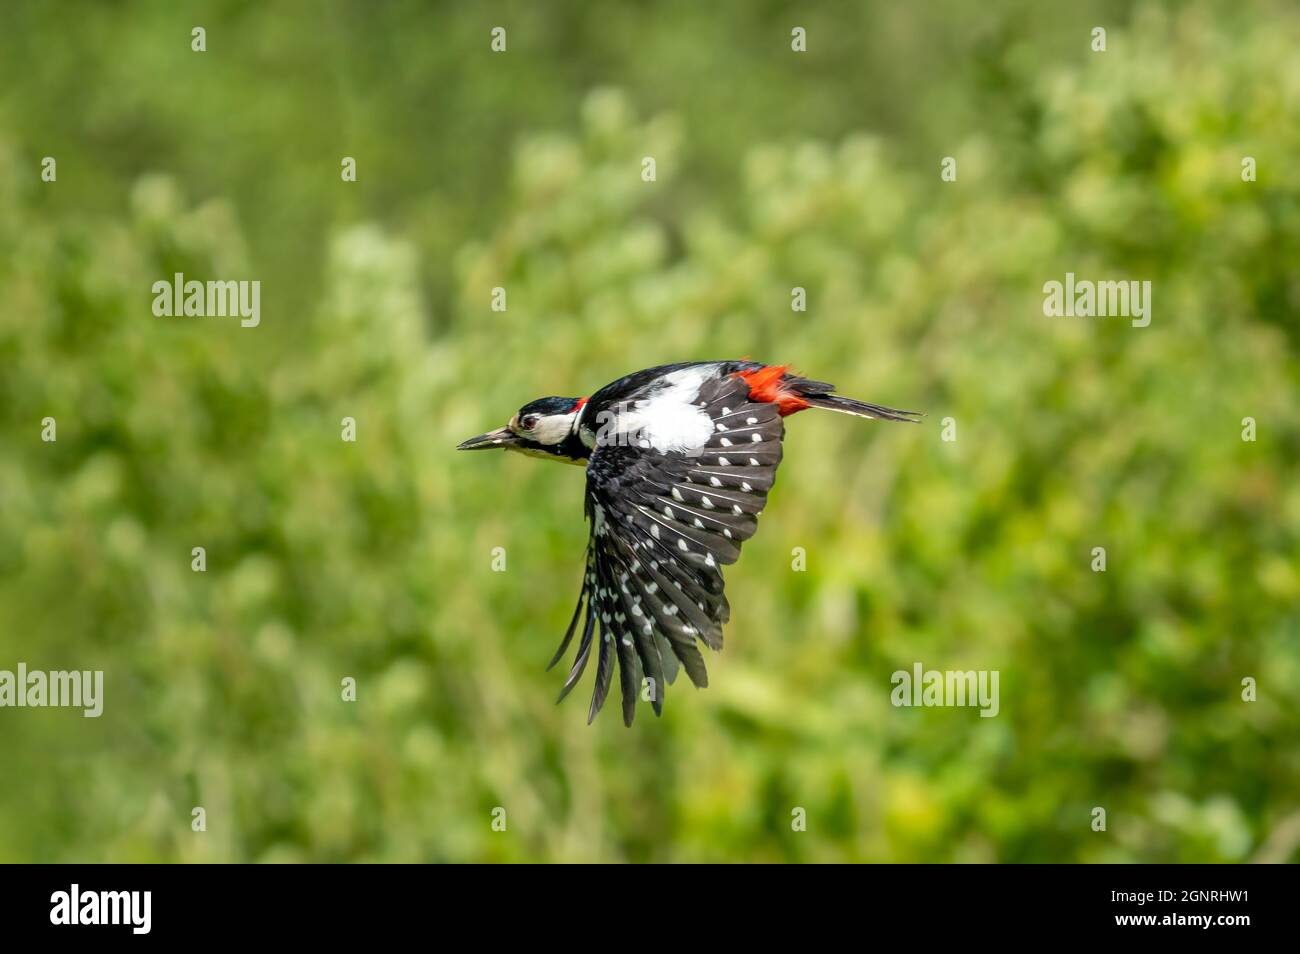 Great spotted woodpecker taking flight from its perch in search of food Stock Photo